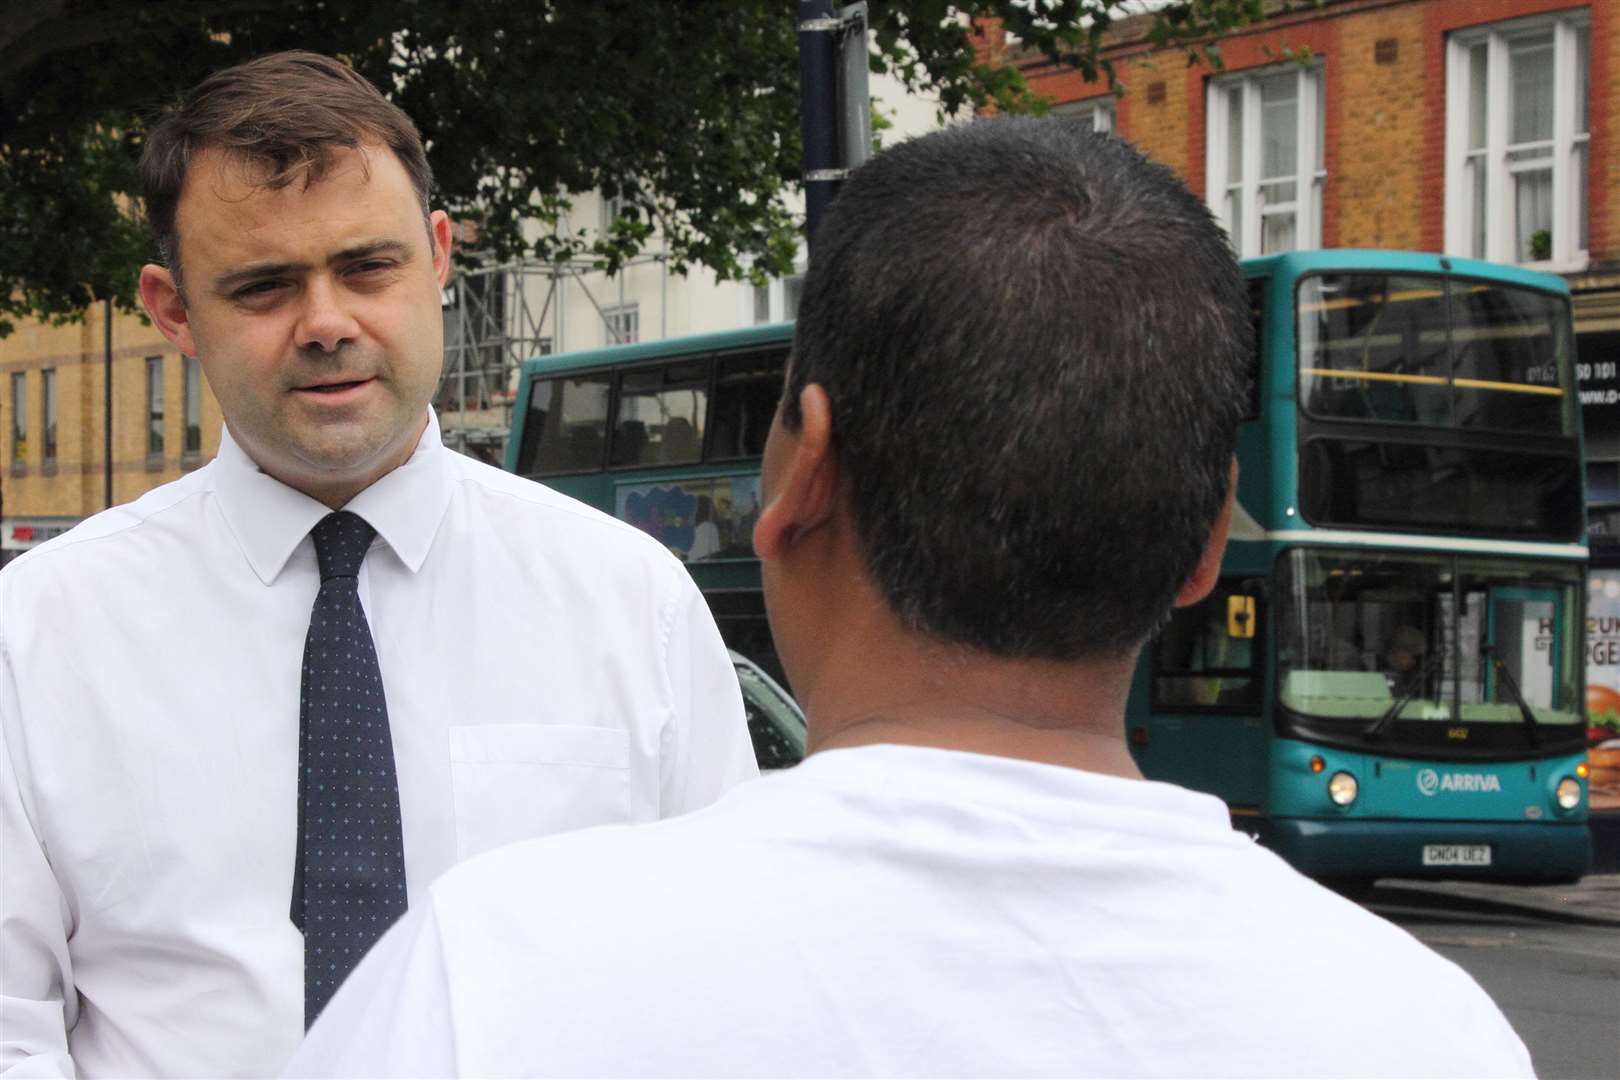 James Willis out speaking to locals about bus services (15941687)